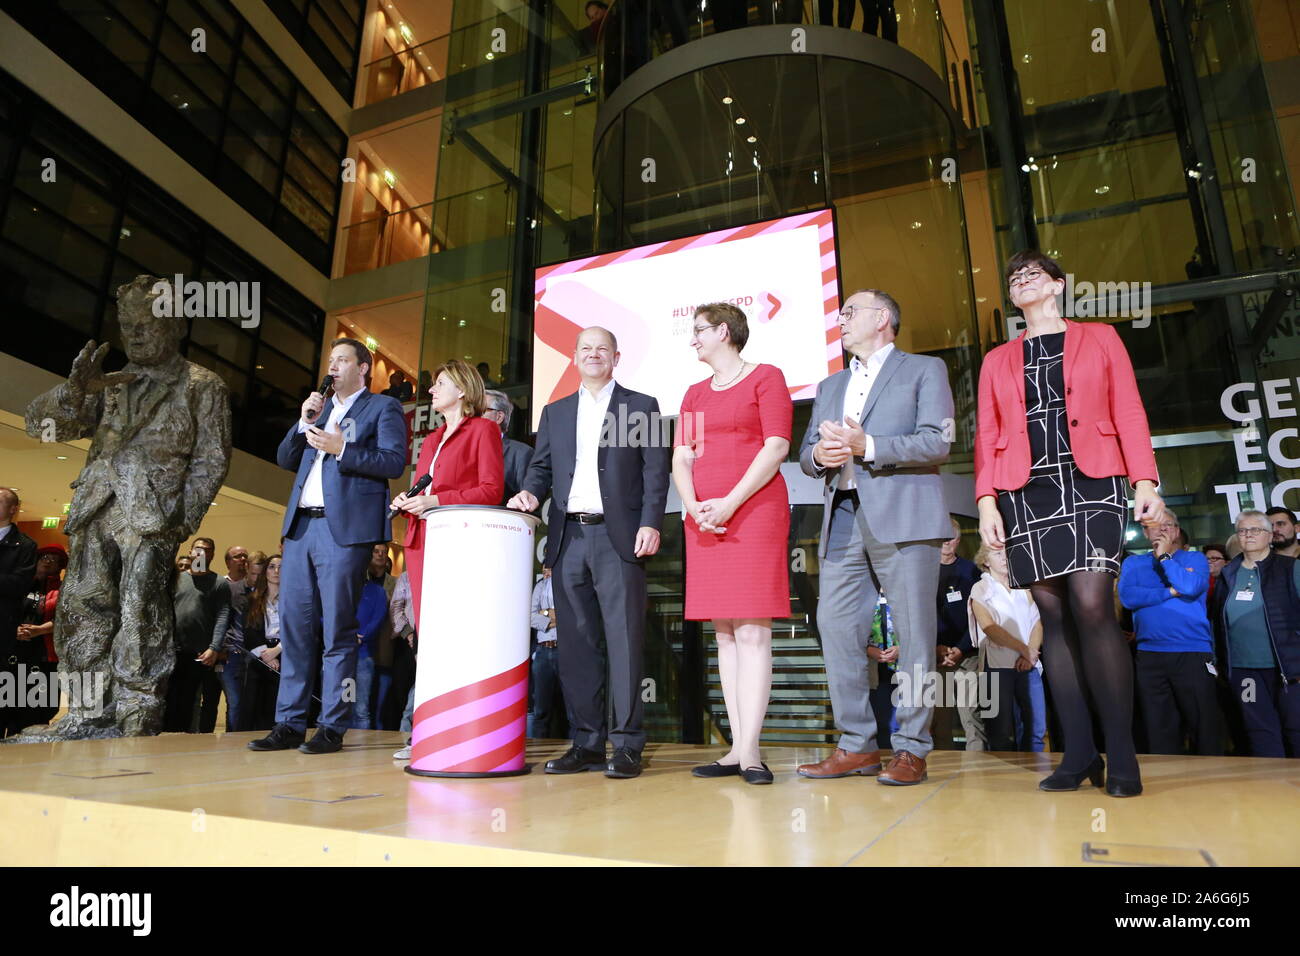 Germany, Berlin, 10/26/2019.Lars Klingbeil, Malu Dreyer,  Dietmar Nietan, Olaf Scholz and Klara Geywitz and Norbert Walter-Borjans and Saskia Esken in the SPD headquarters in Berlin. The SPD members elect Federal Finance Minister Olaf Scholz and Klara Geywitz just ahead of Norbert Walter-Borjans and Saskia Esken for the SPD presidency. The race for the SPD presidency goes into the runoff election in November: the two candidates will then be elected at the party congress. Stock Photo